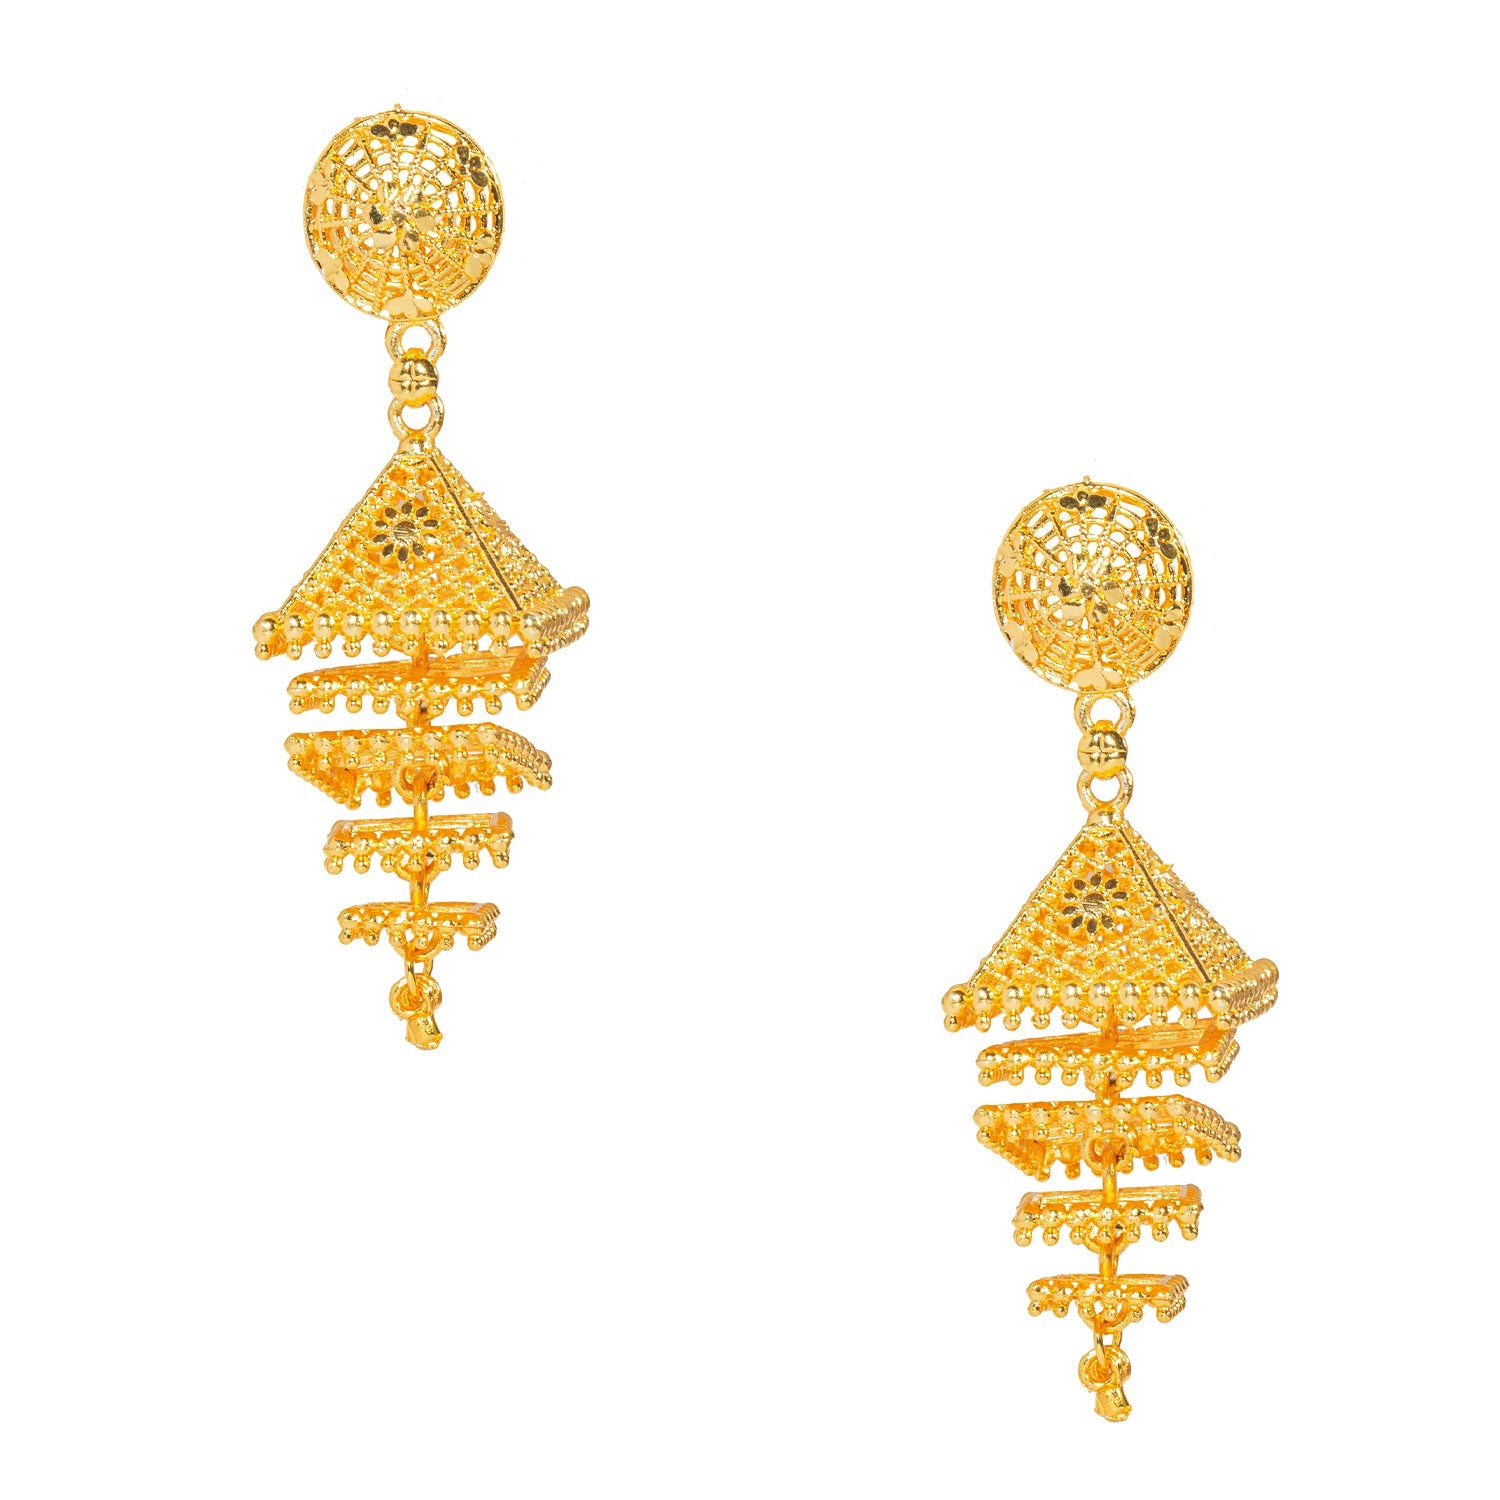 Amazon.com: Mariell Gold Teardrop Austrian Crystal Dangle Chandelier  Earrings for Wedding, Lightweight Designer Earrings For Brides, Prom,  Pageant & Bridesmaids : Mariell: Clothing, Shoes & Jewelry